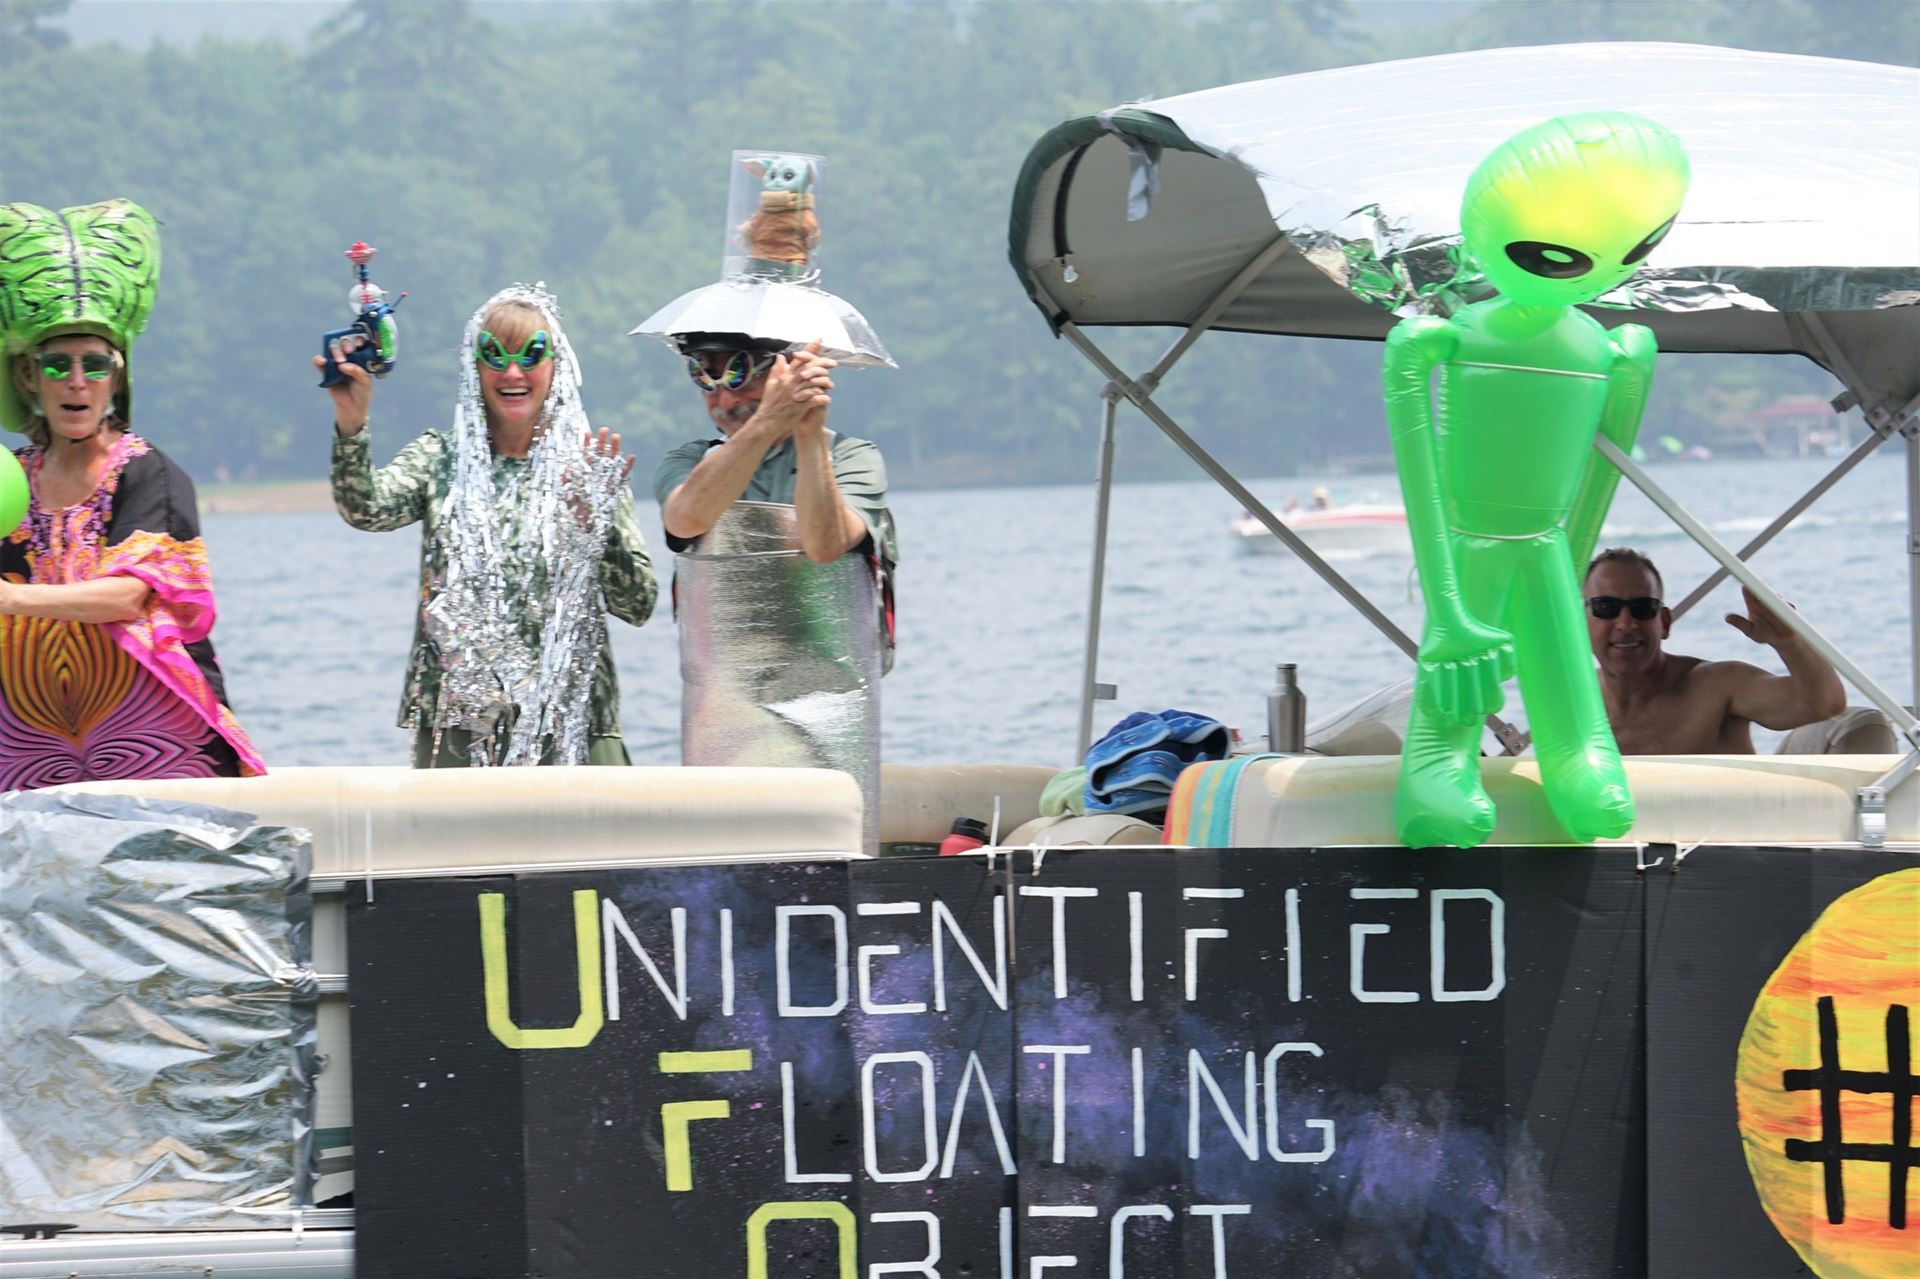 Most Original: Boat #1 - Unidentified Floating Object - The Goldman Family 